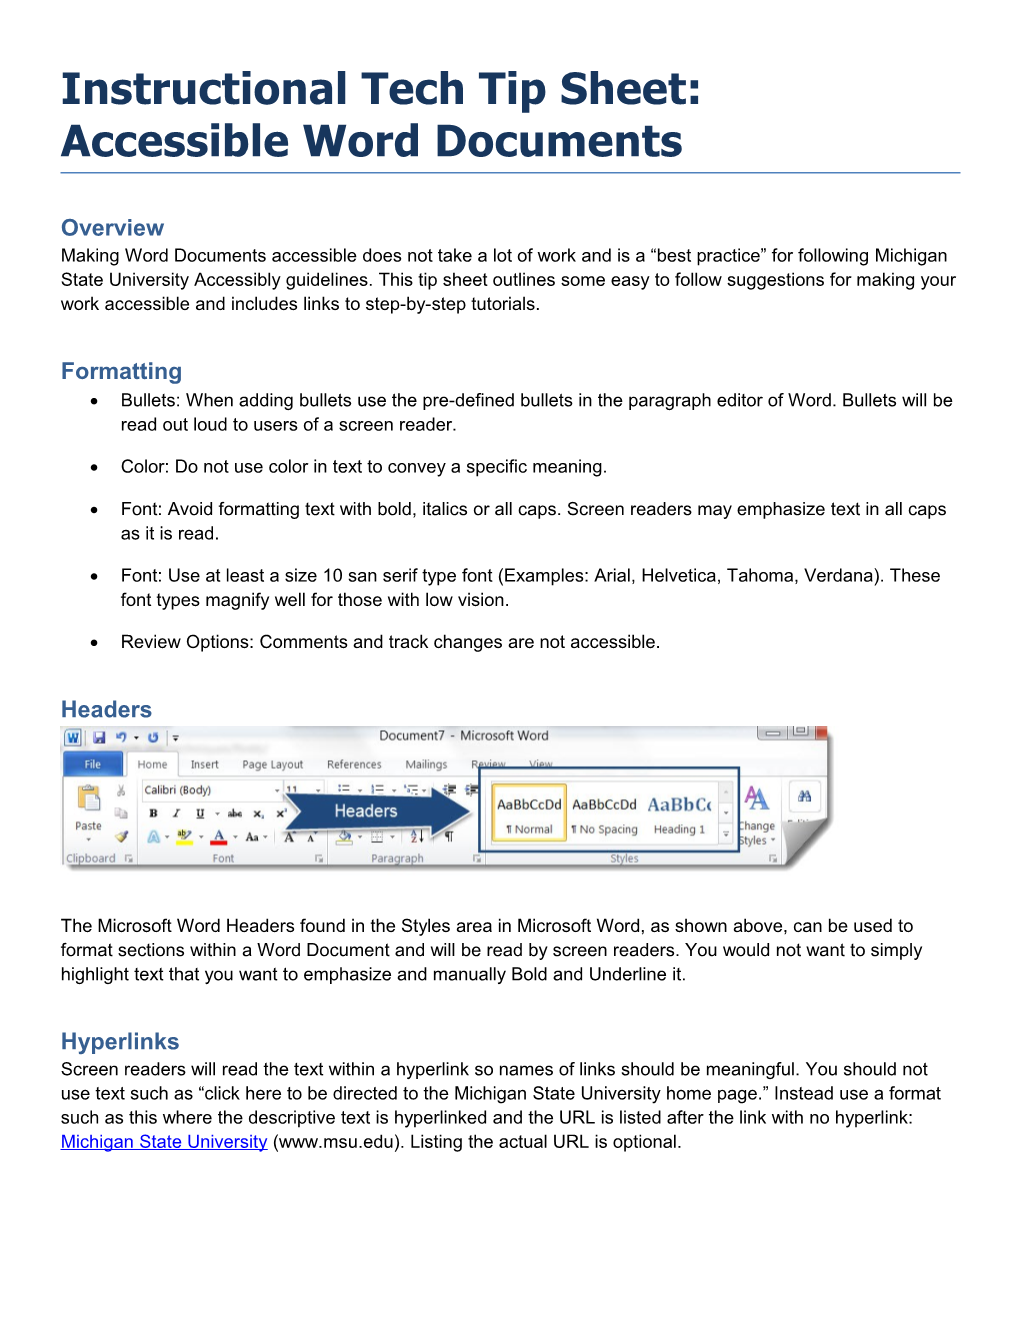 Instructional Tech Tip Sheet: Accessible Word Documents